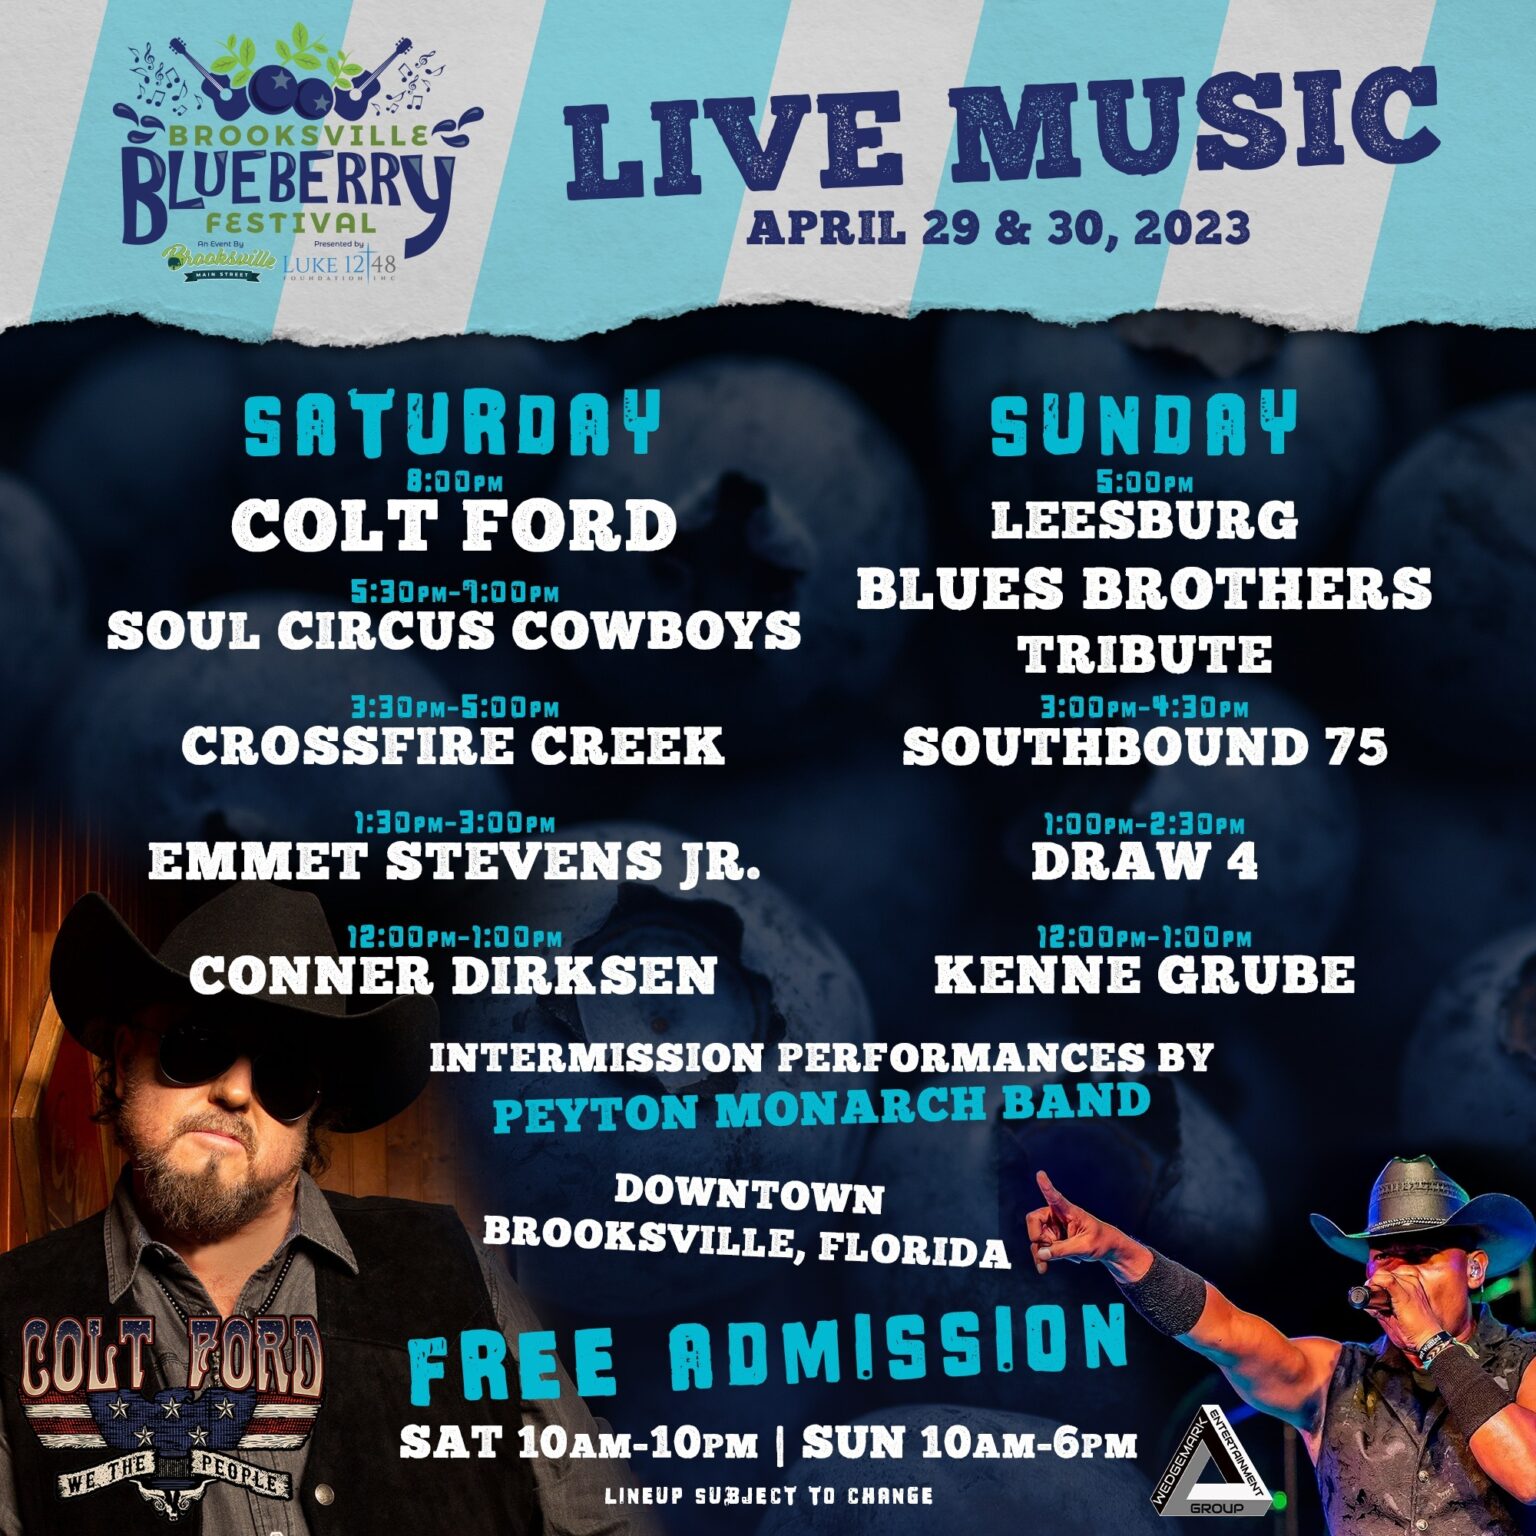 Blueberry Festival Brooksville South Florida Country Music